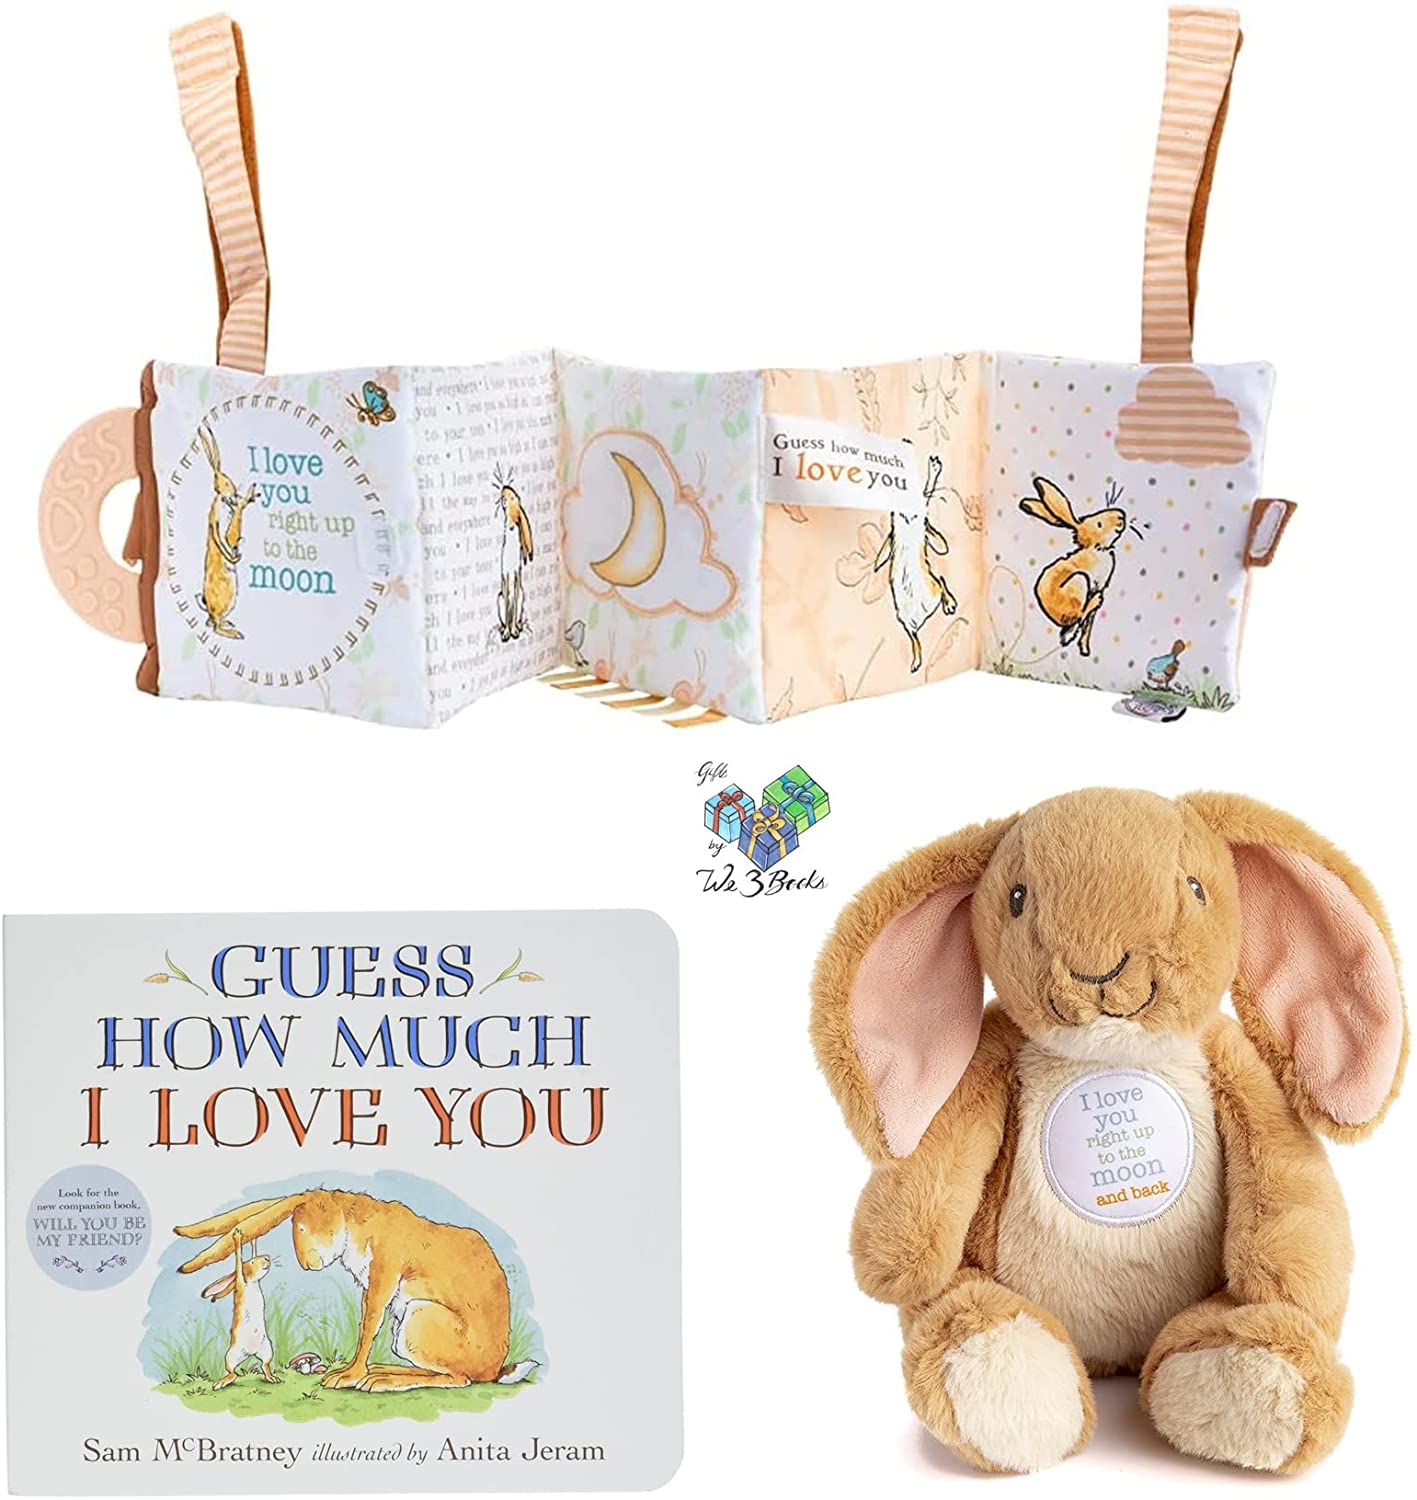 9 and Book Guess How Much I Love You Nutbrown Hare Bean Bag Plush 2 Piece Bunny+Book Baby Gift Set 